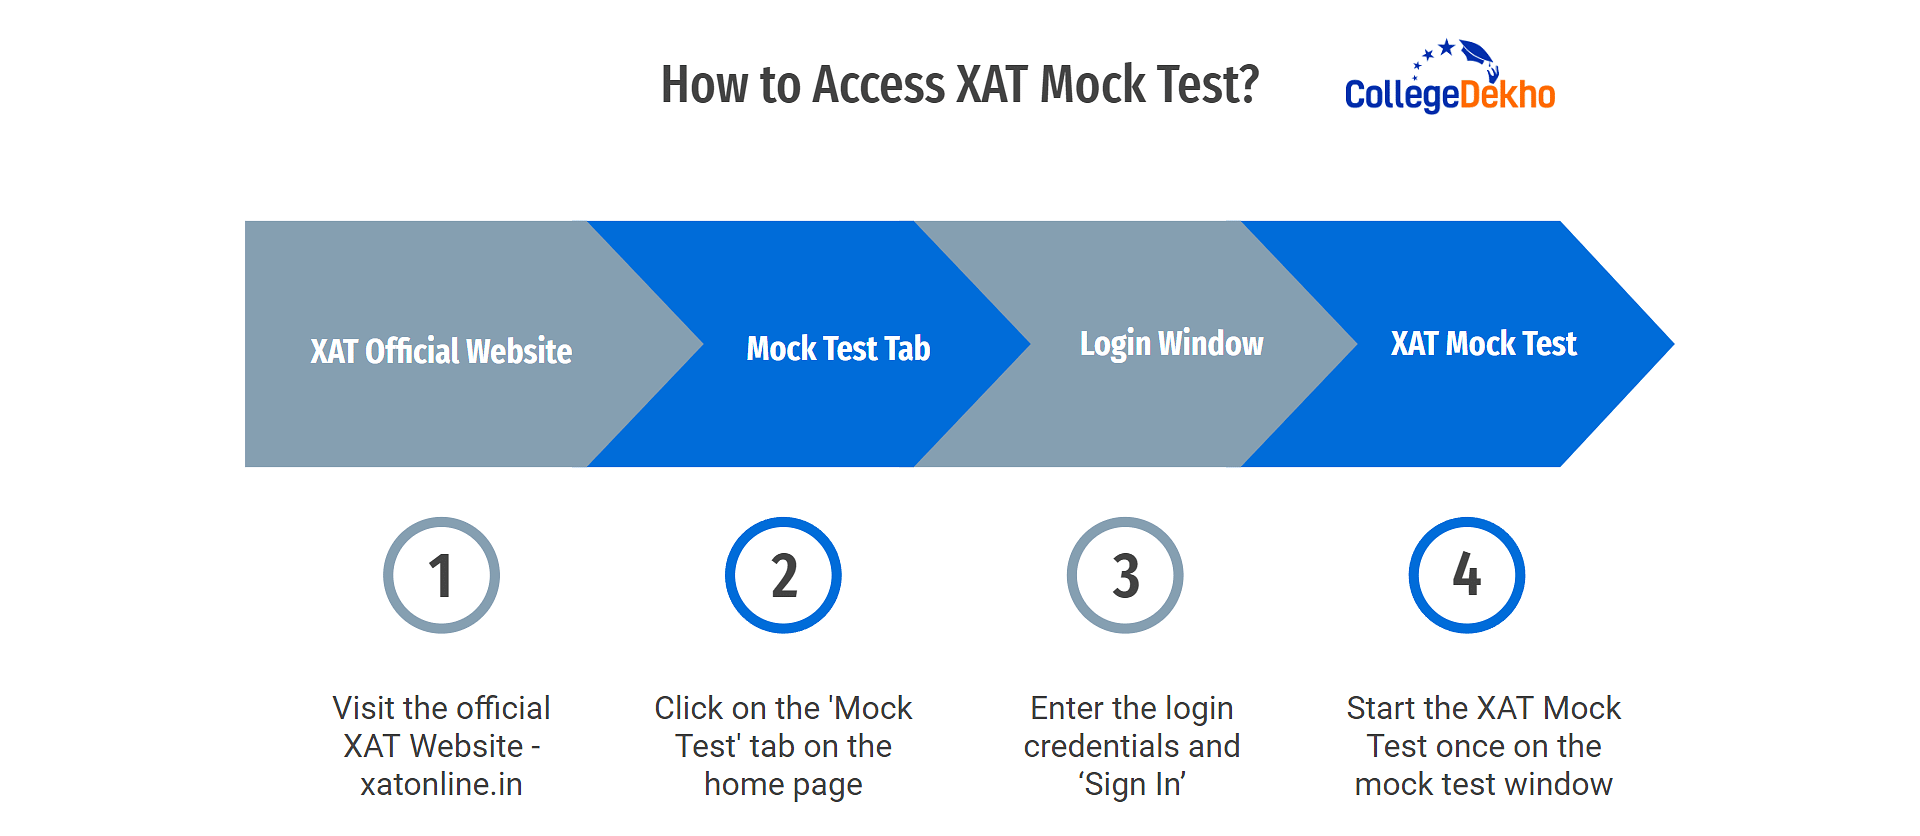 How to Access XAT Mock Test